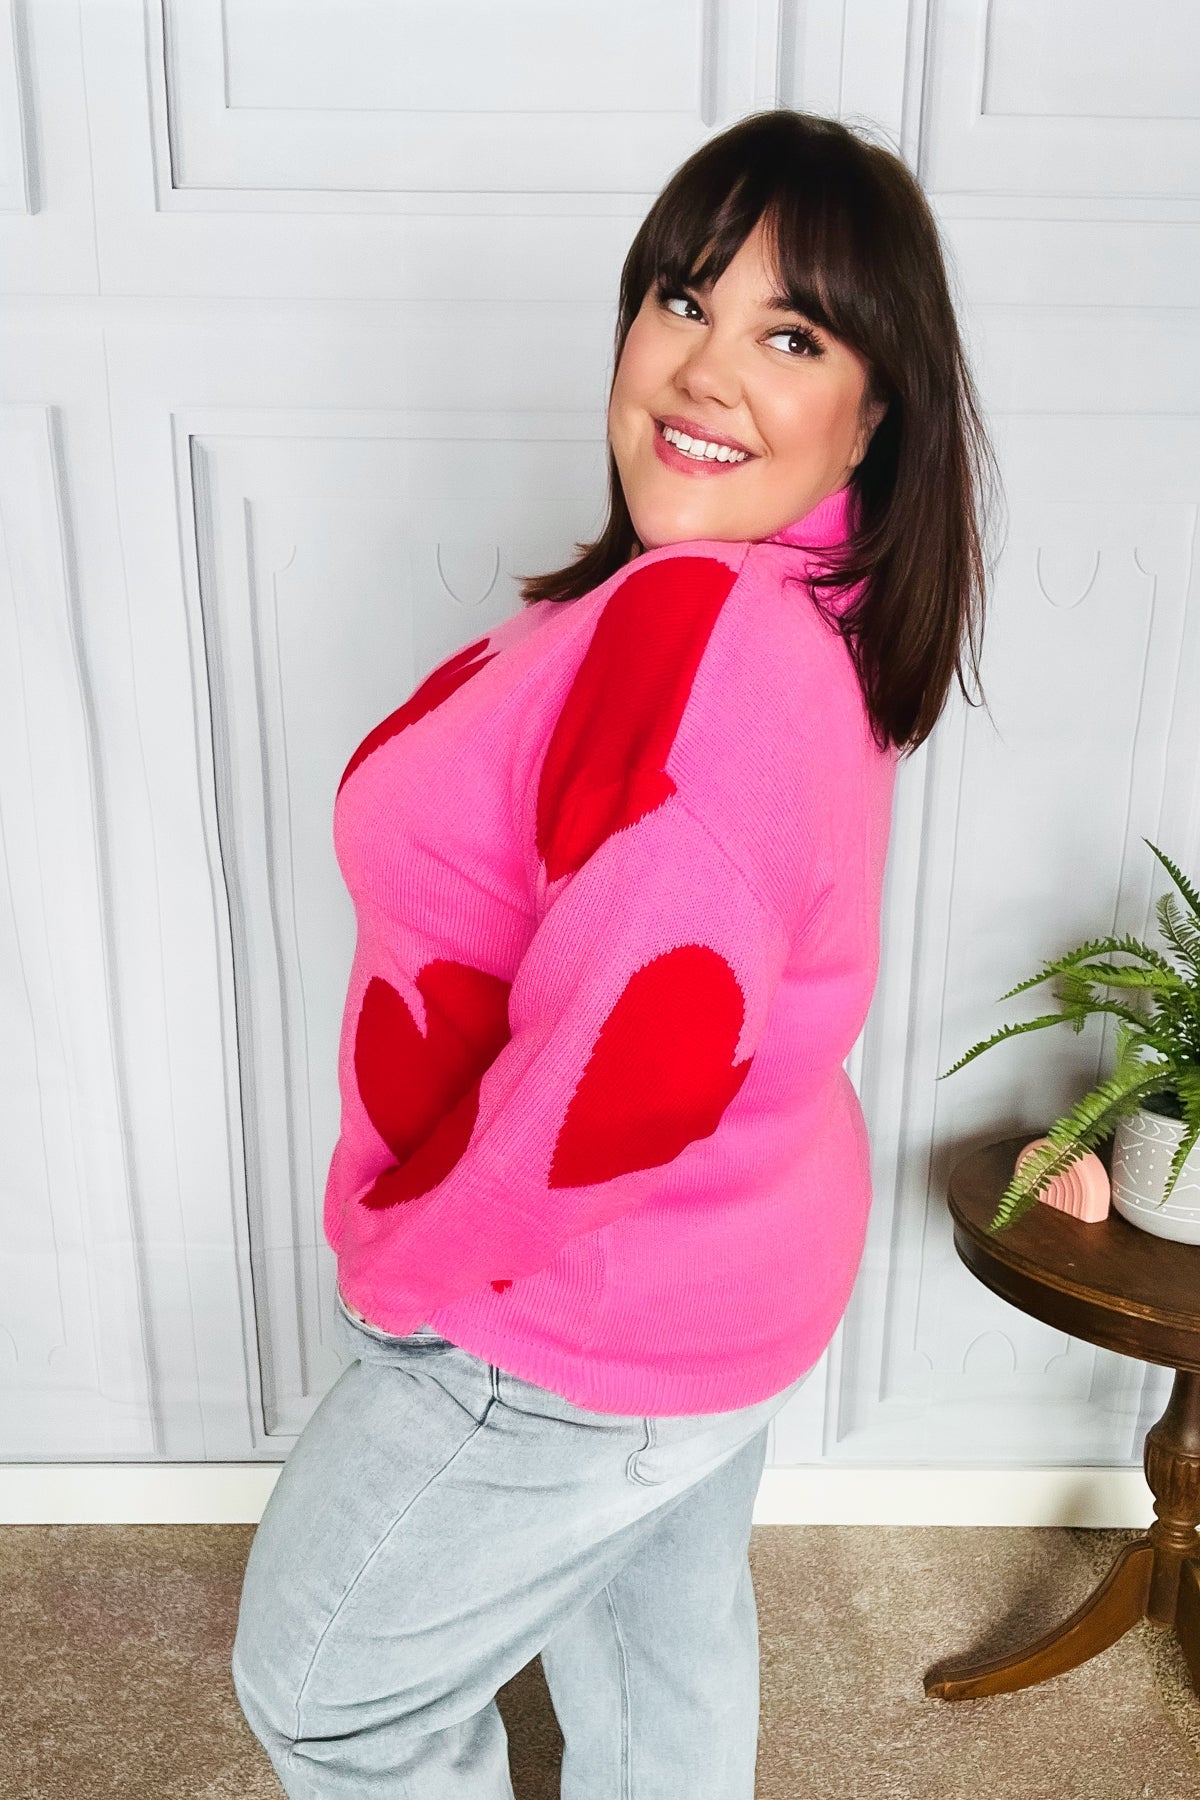 Cupid's Arrow Pink & Red Heart Jacquard Sweater - Sybaritic Bags & Clothing